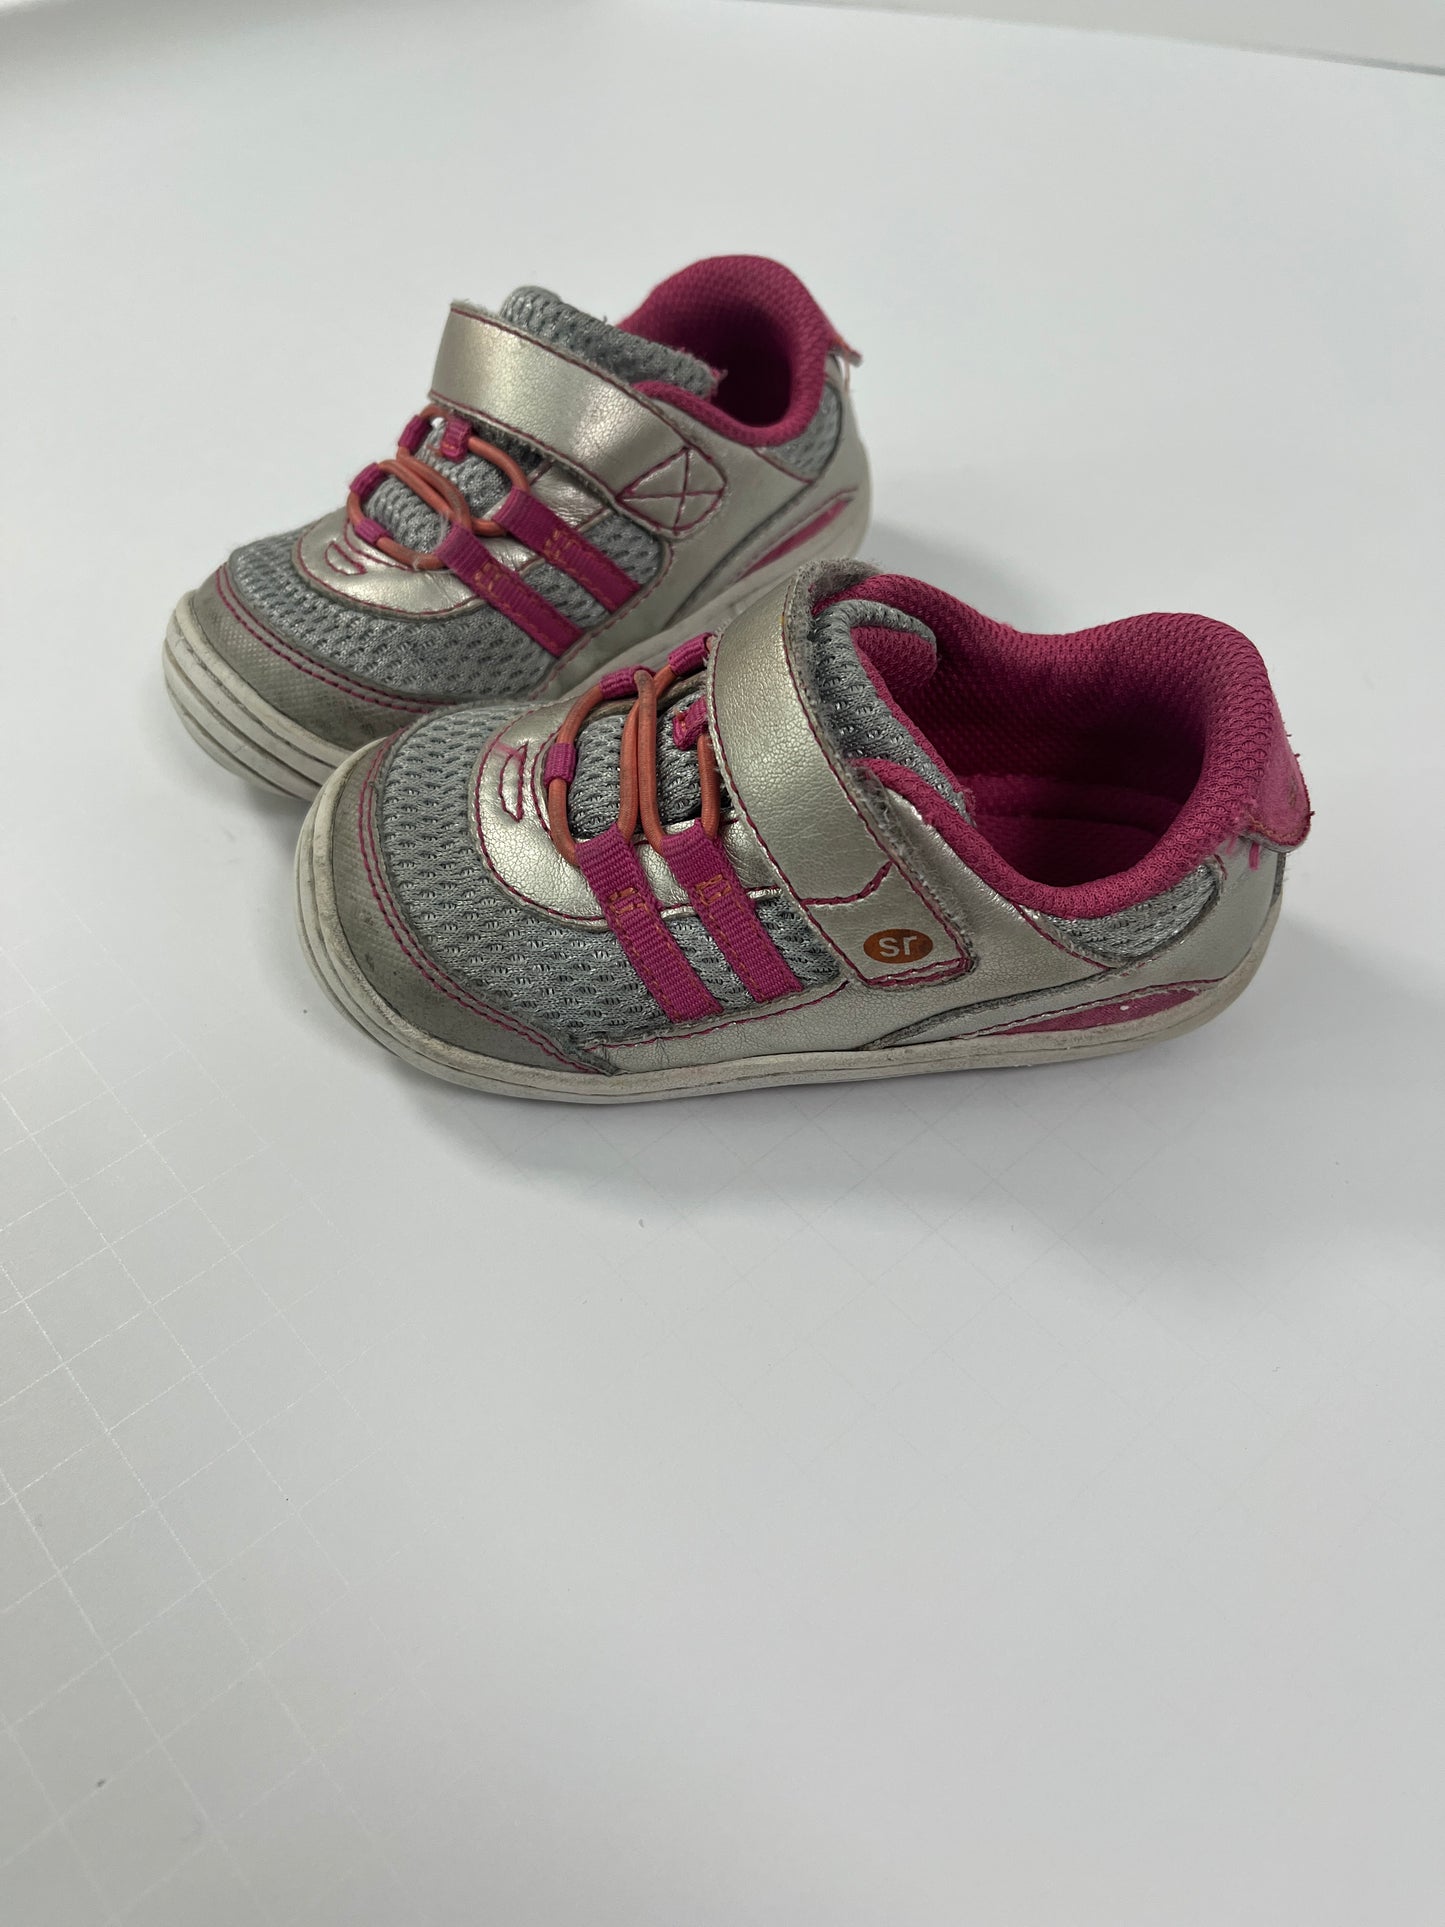 PPU 45242 girls Stride Rite size 6 silver/pink sneakers